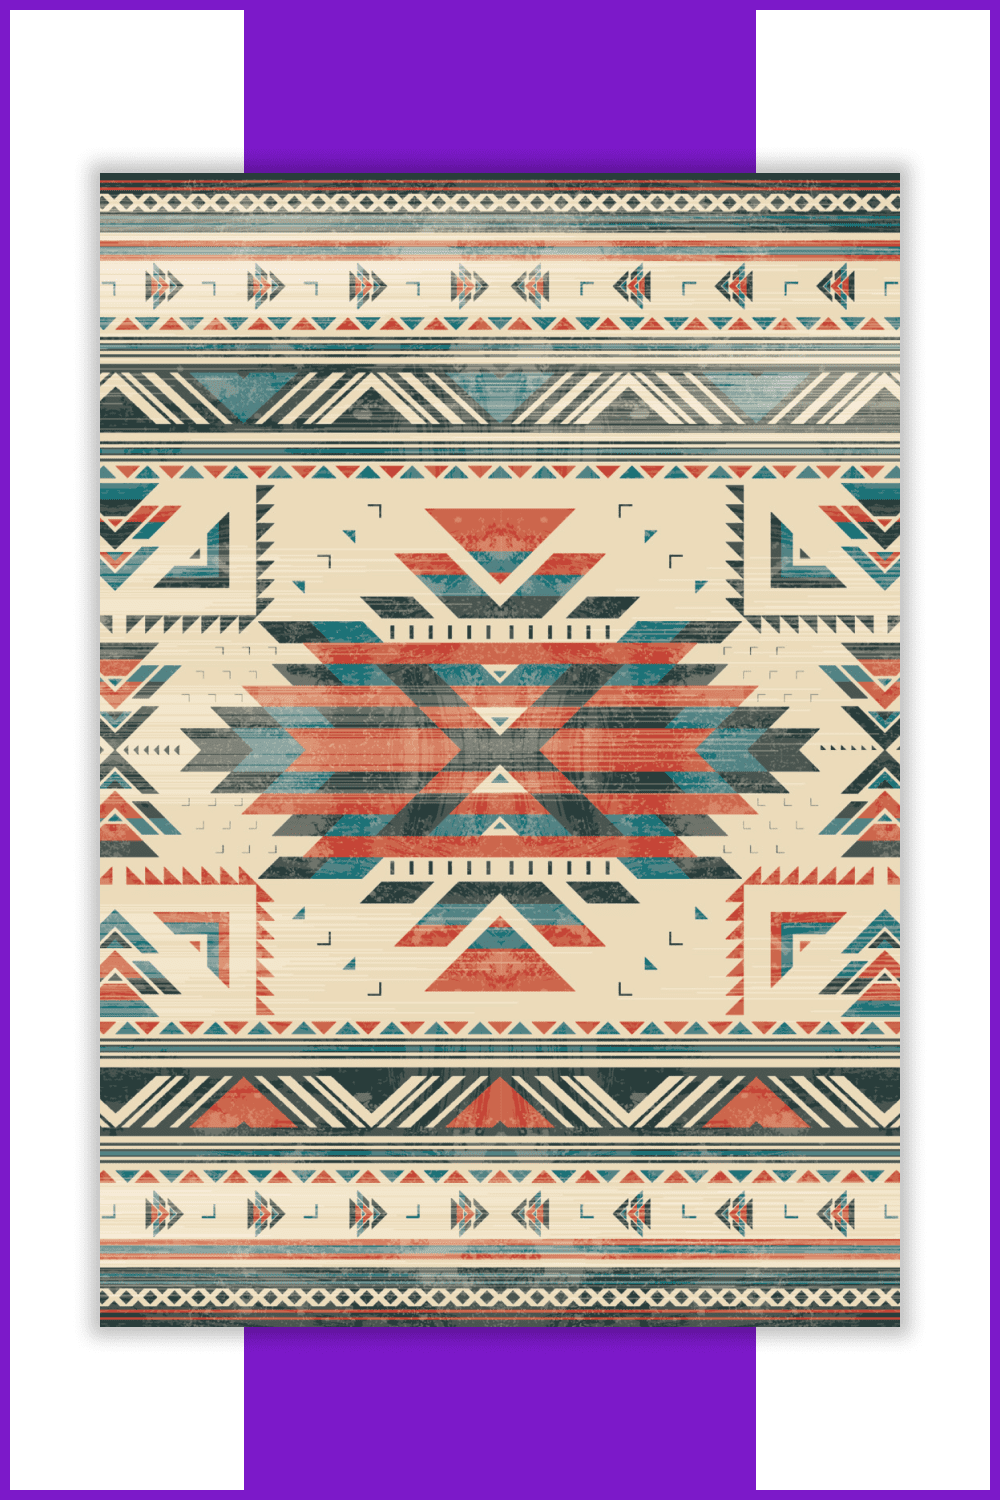 Image of a carpet with a Native American pattern.